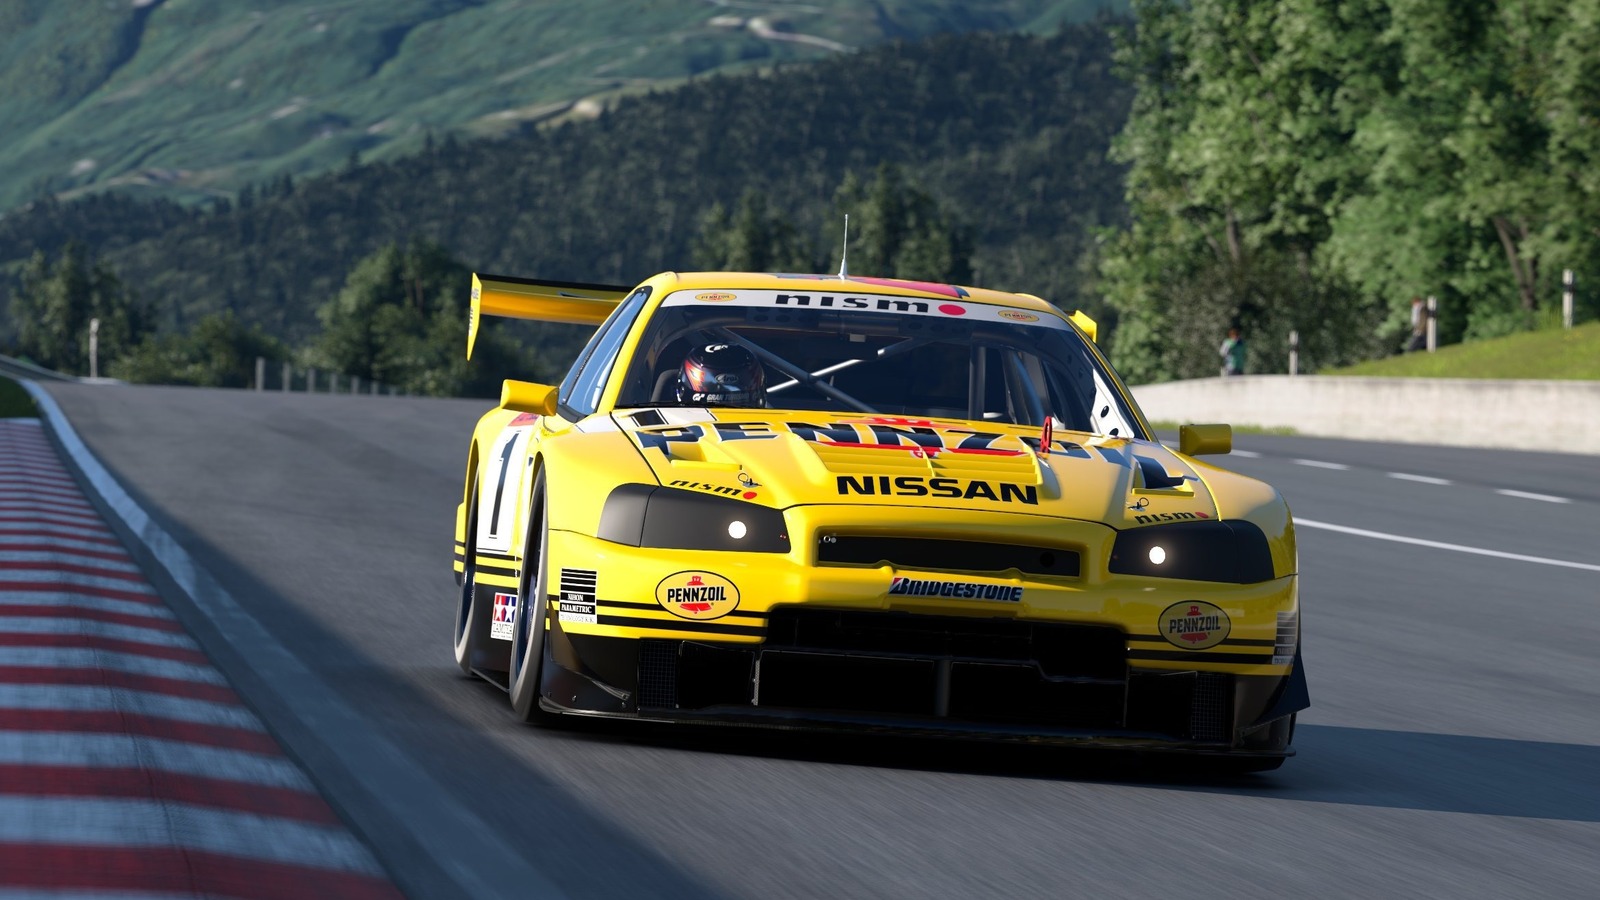 Gran Turismo 7 is the lowest rated Sony game ever by users on Metacritic